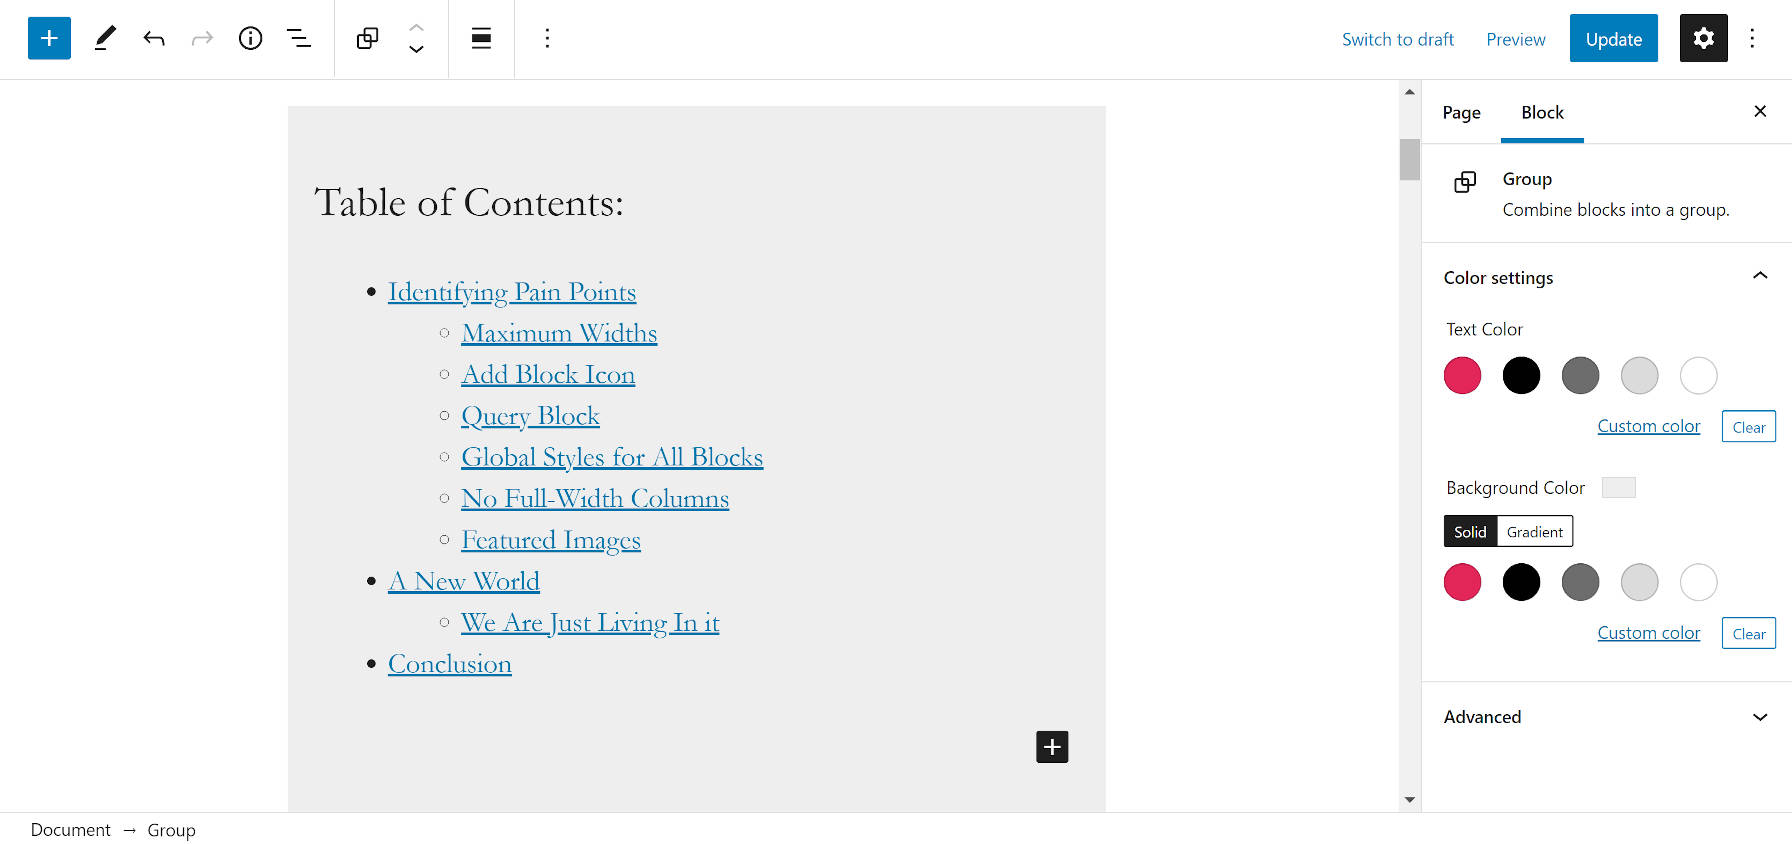 WordPress post editor with highlighted section showing the table of contents area for posts.